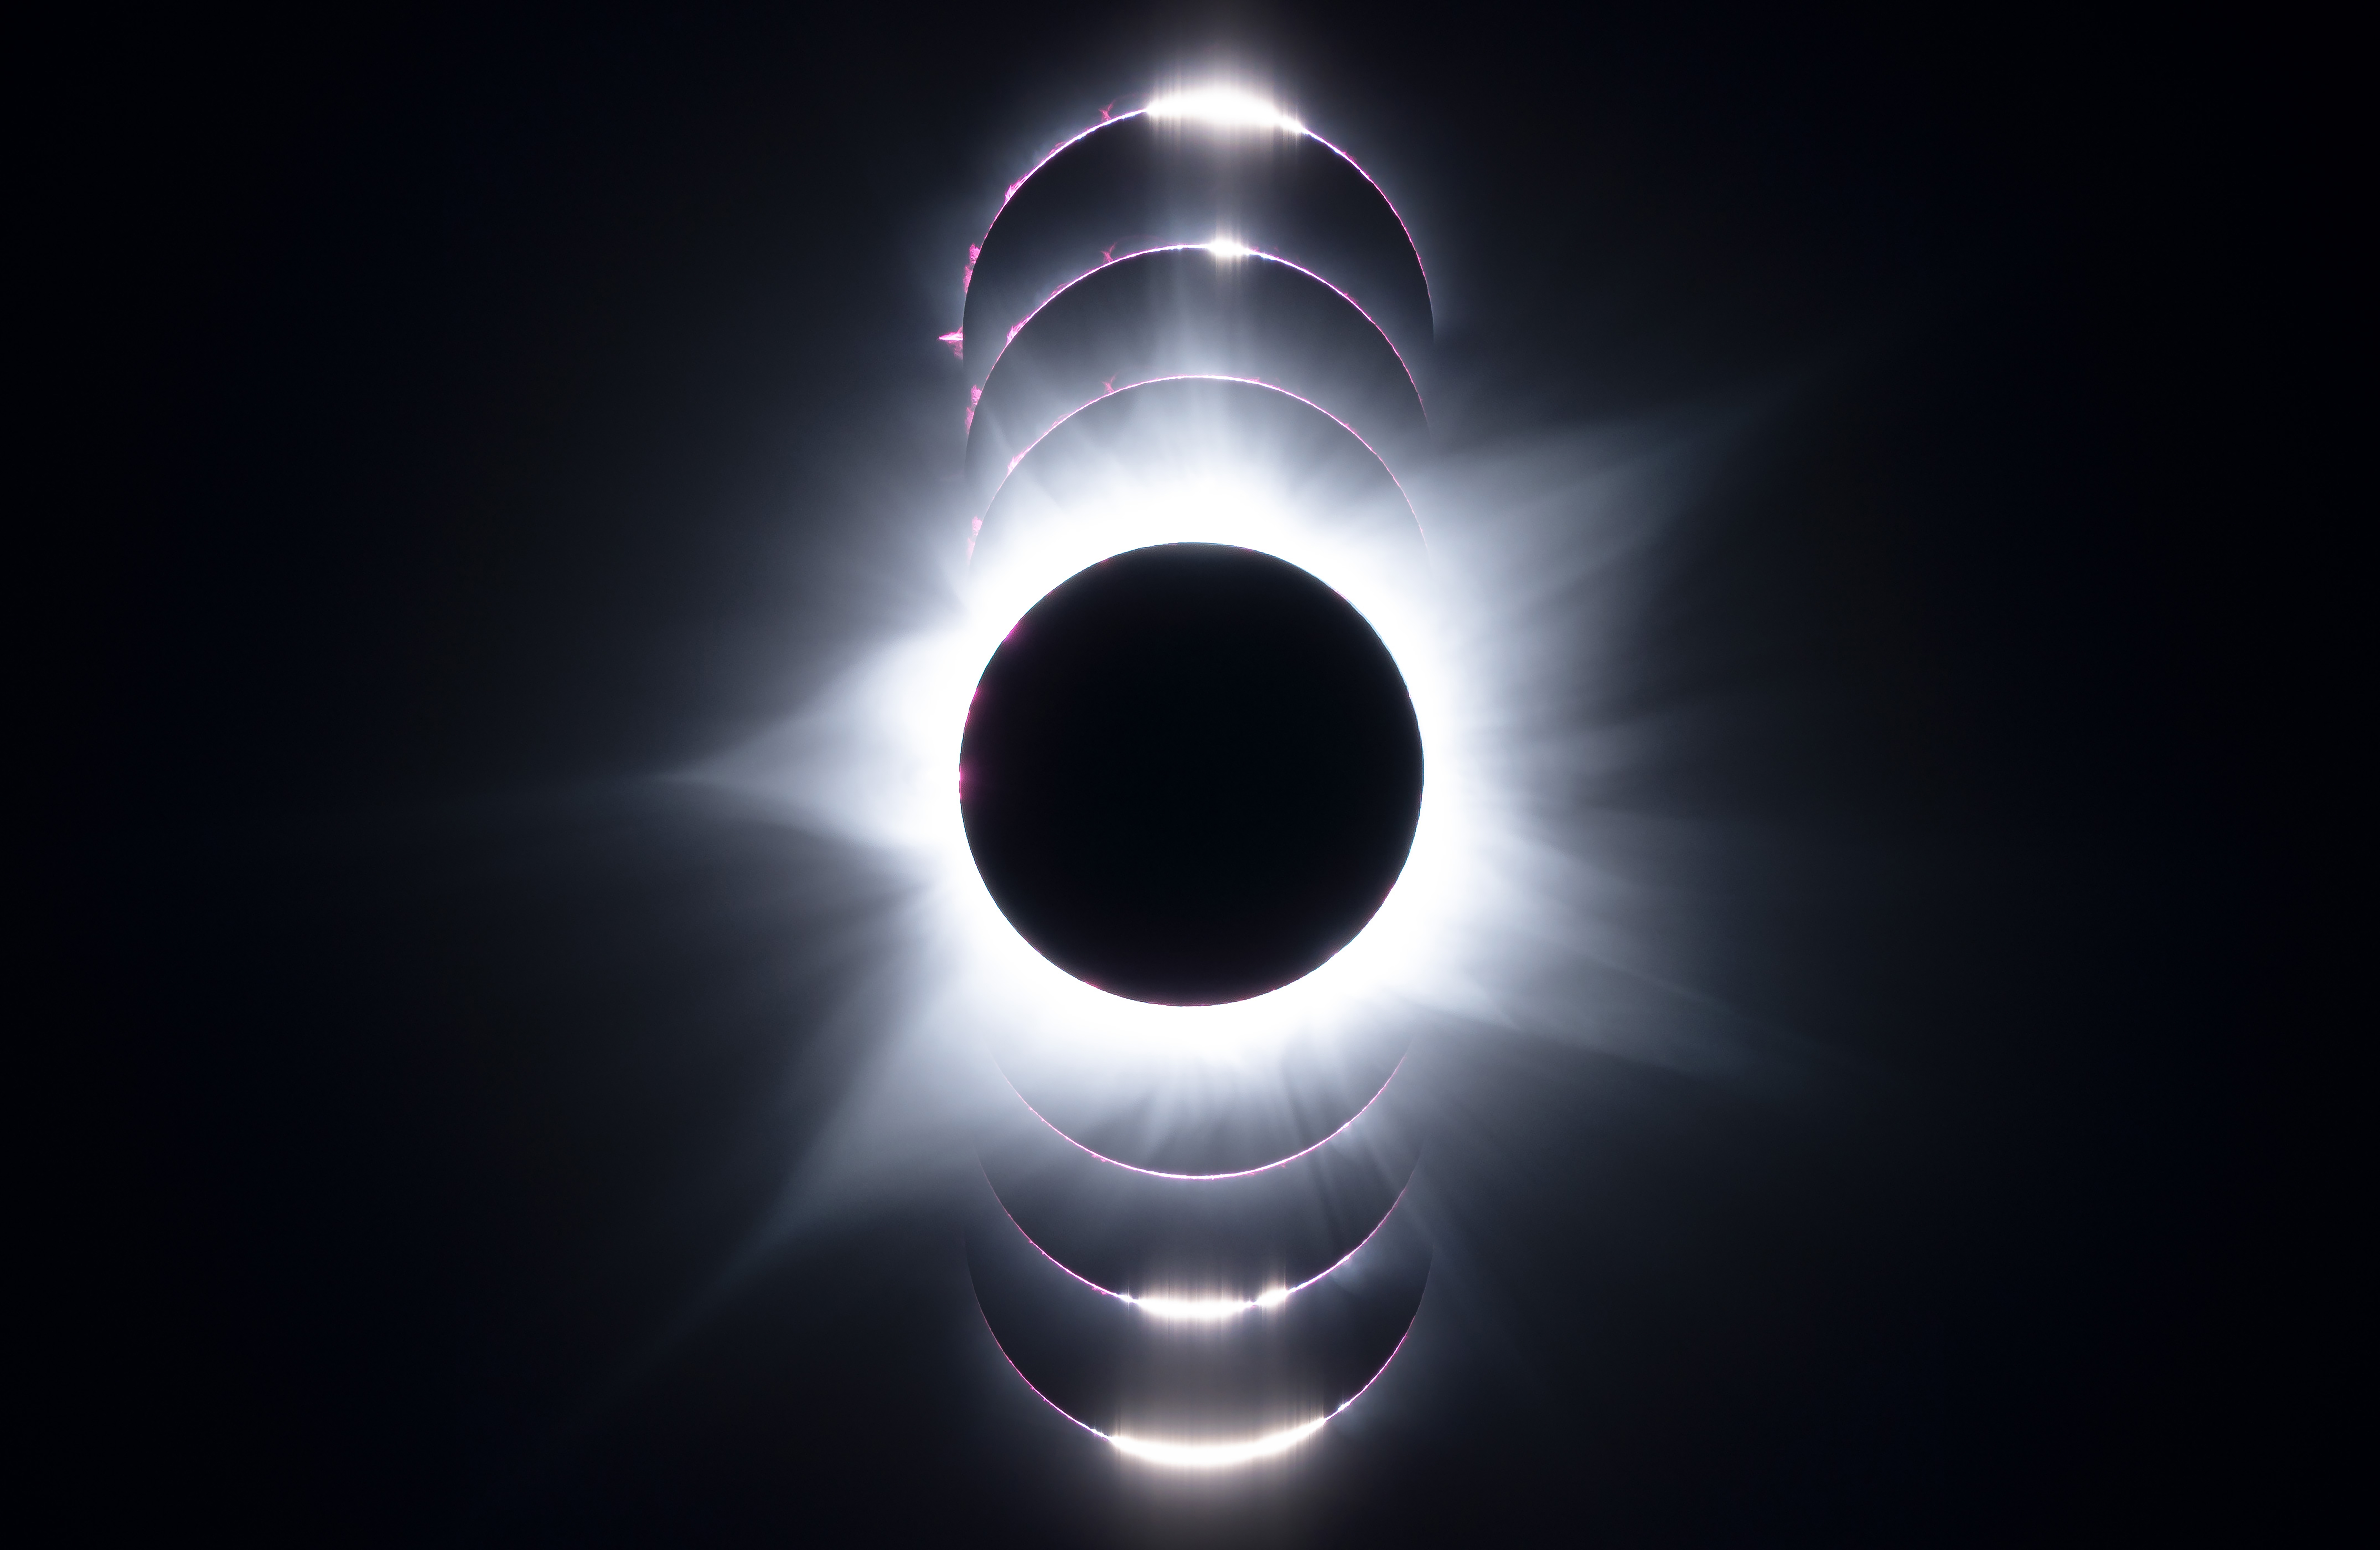 Seven exposure of the Sun around totality with the the eclipse sun uin the middle and the instant as totality is approached and left, below and above creating like an echo or parenthesis effect